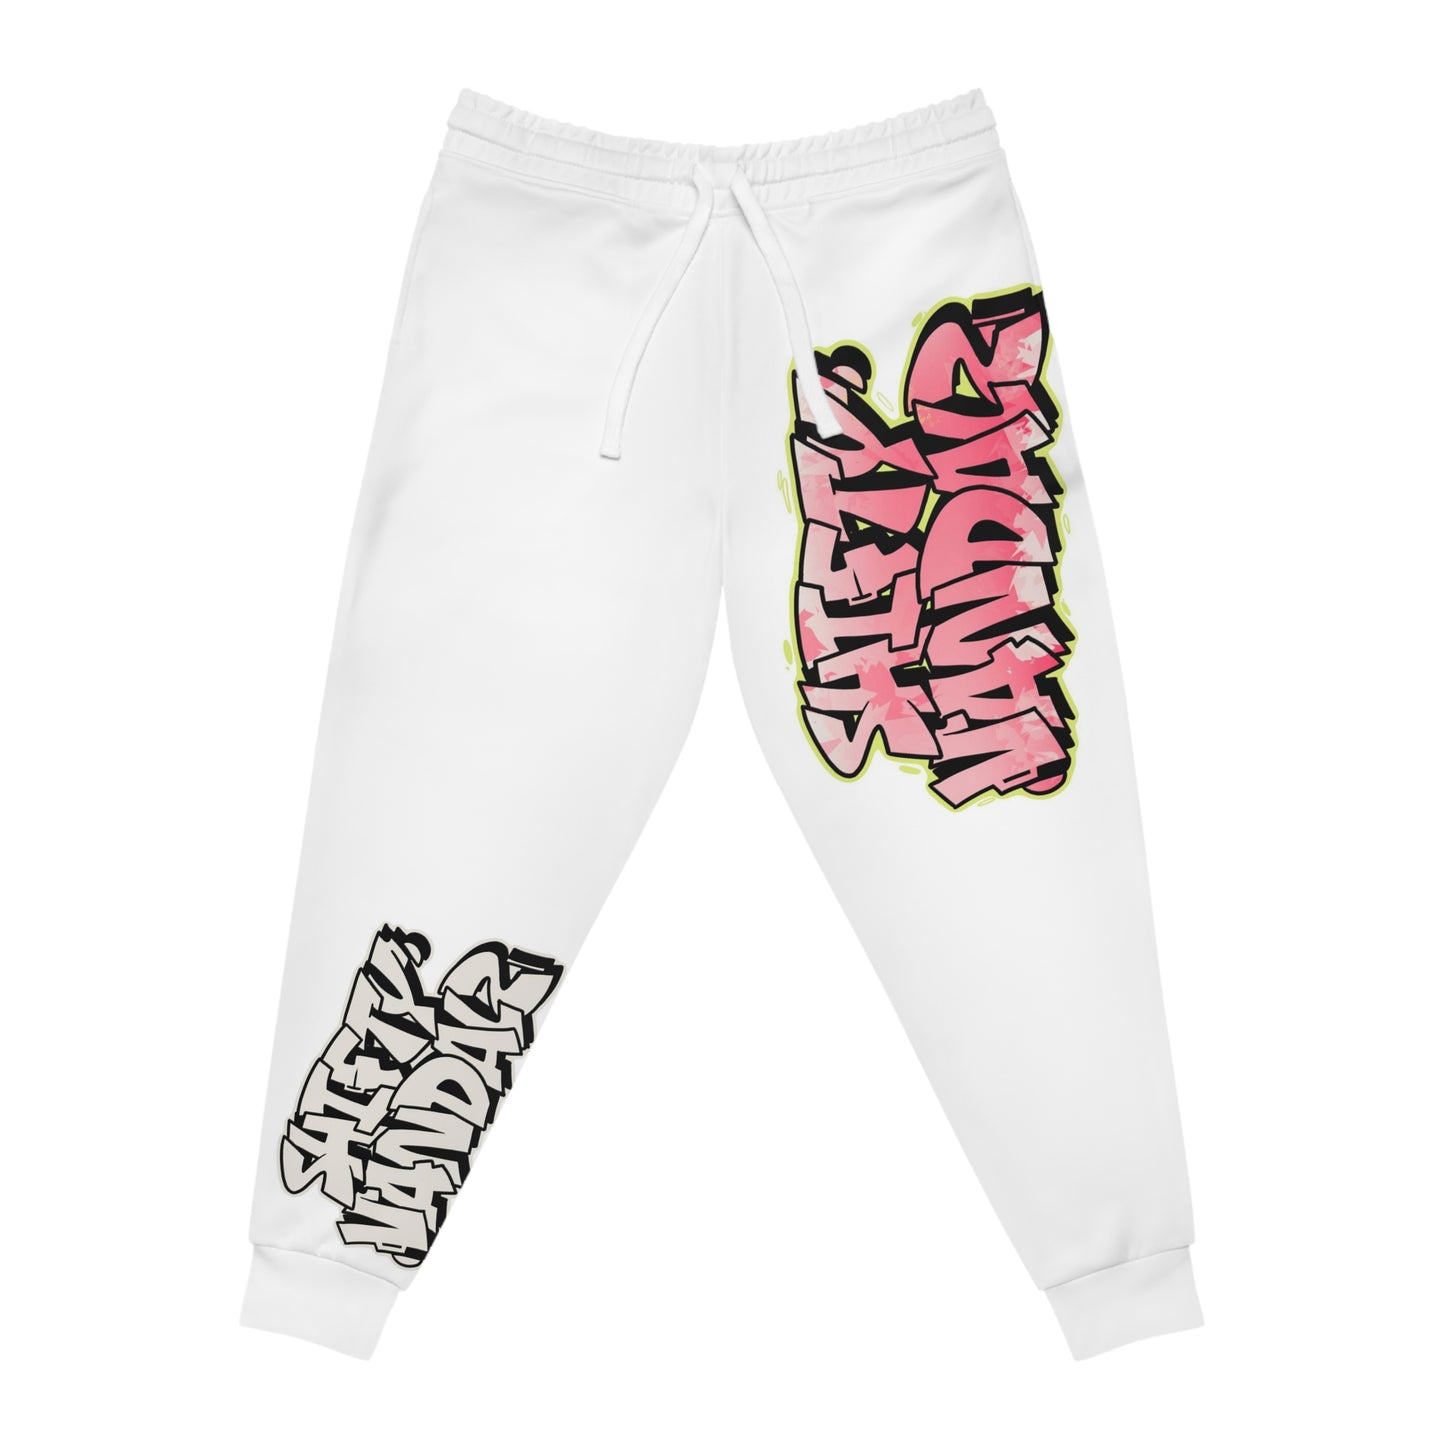 Official shiftyvandalz joggers(Images switched)